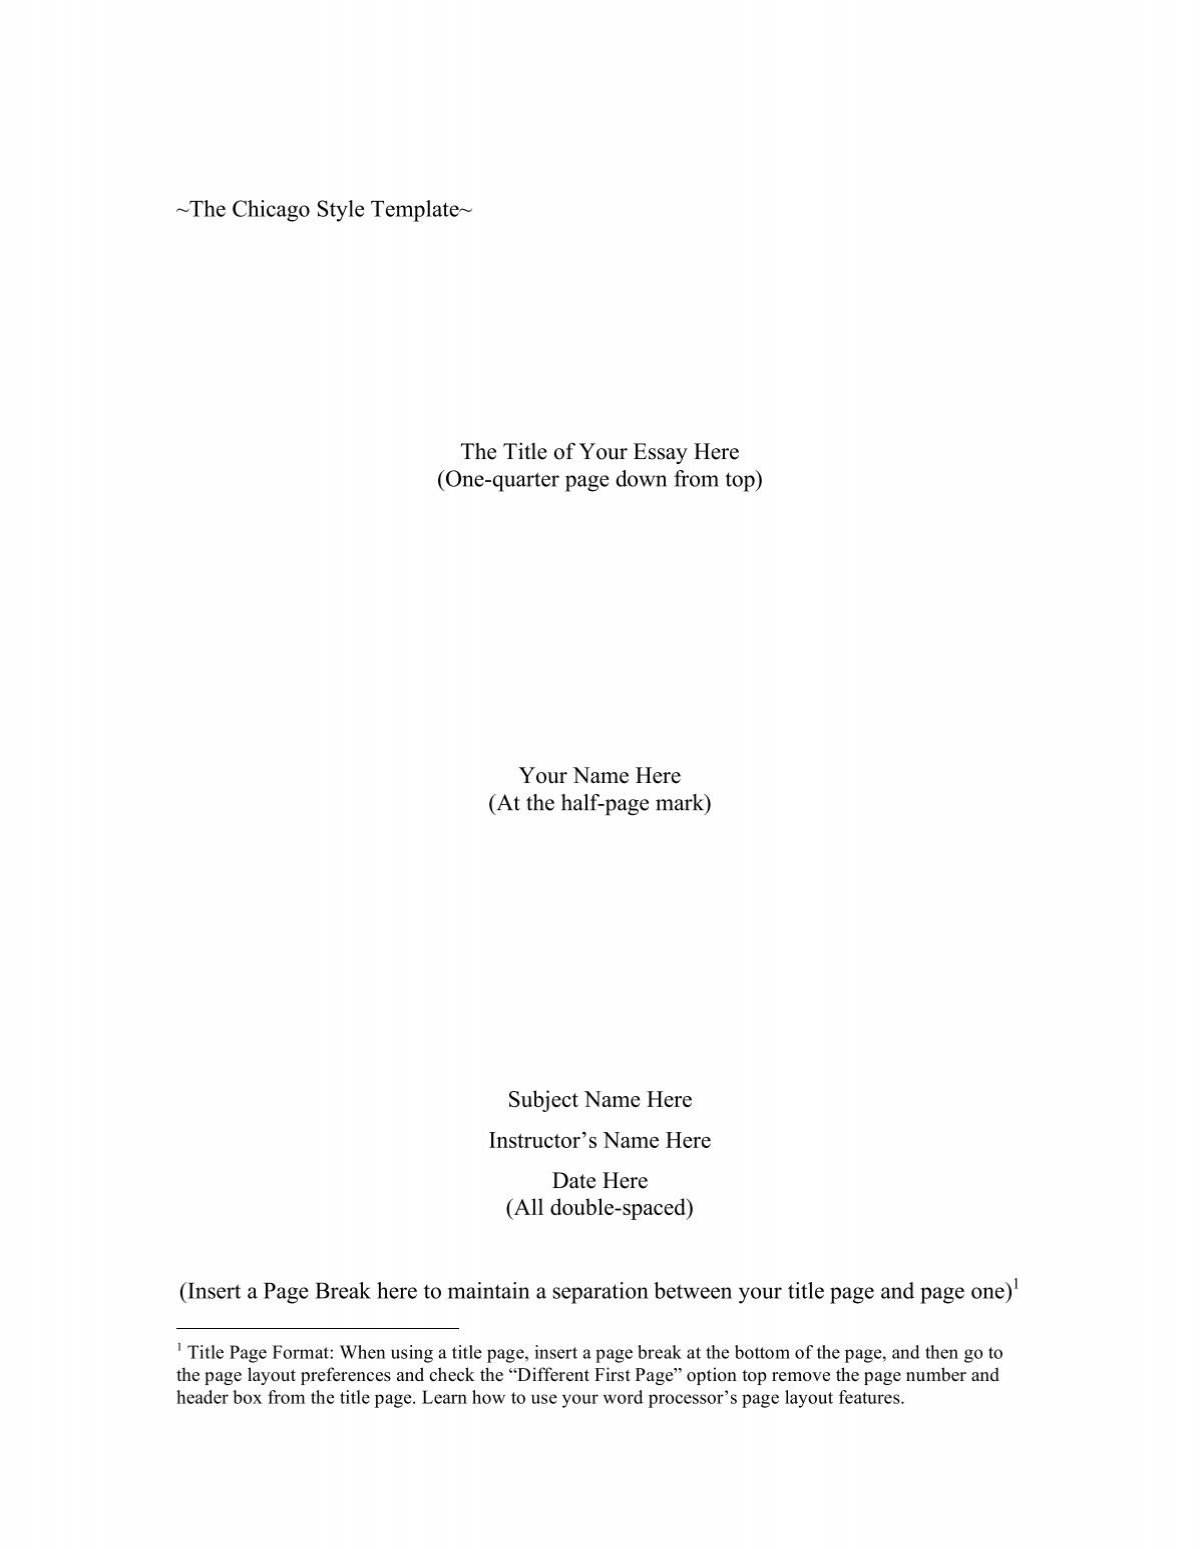 ~The Chicago Style Template~ The Title of Your Essay Here (One